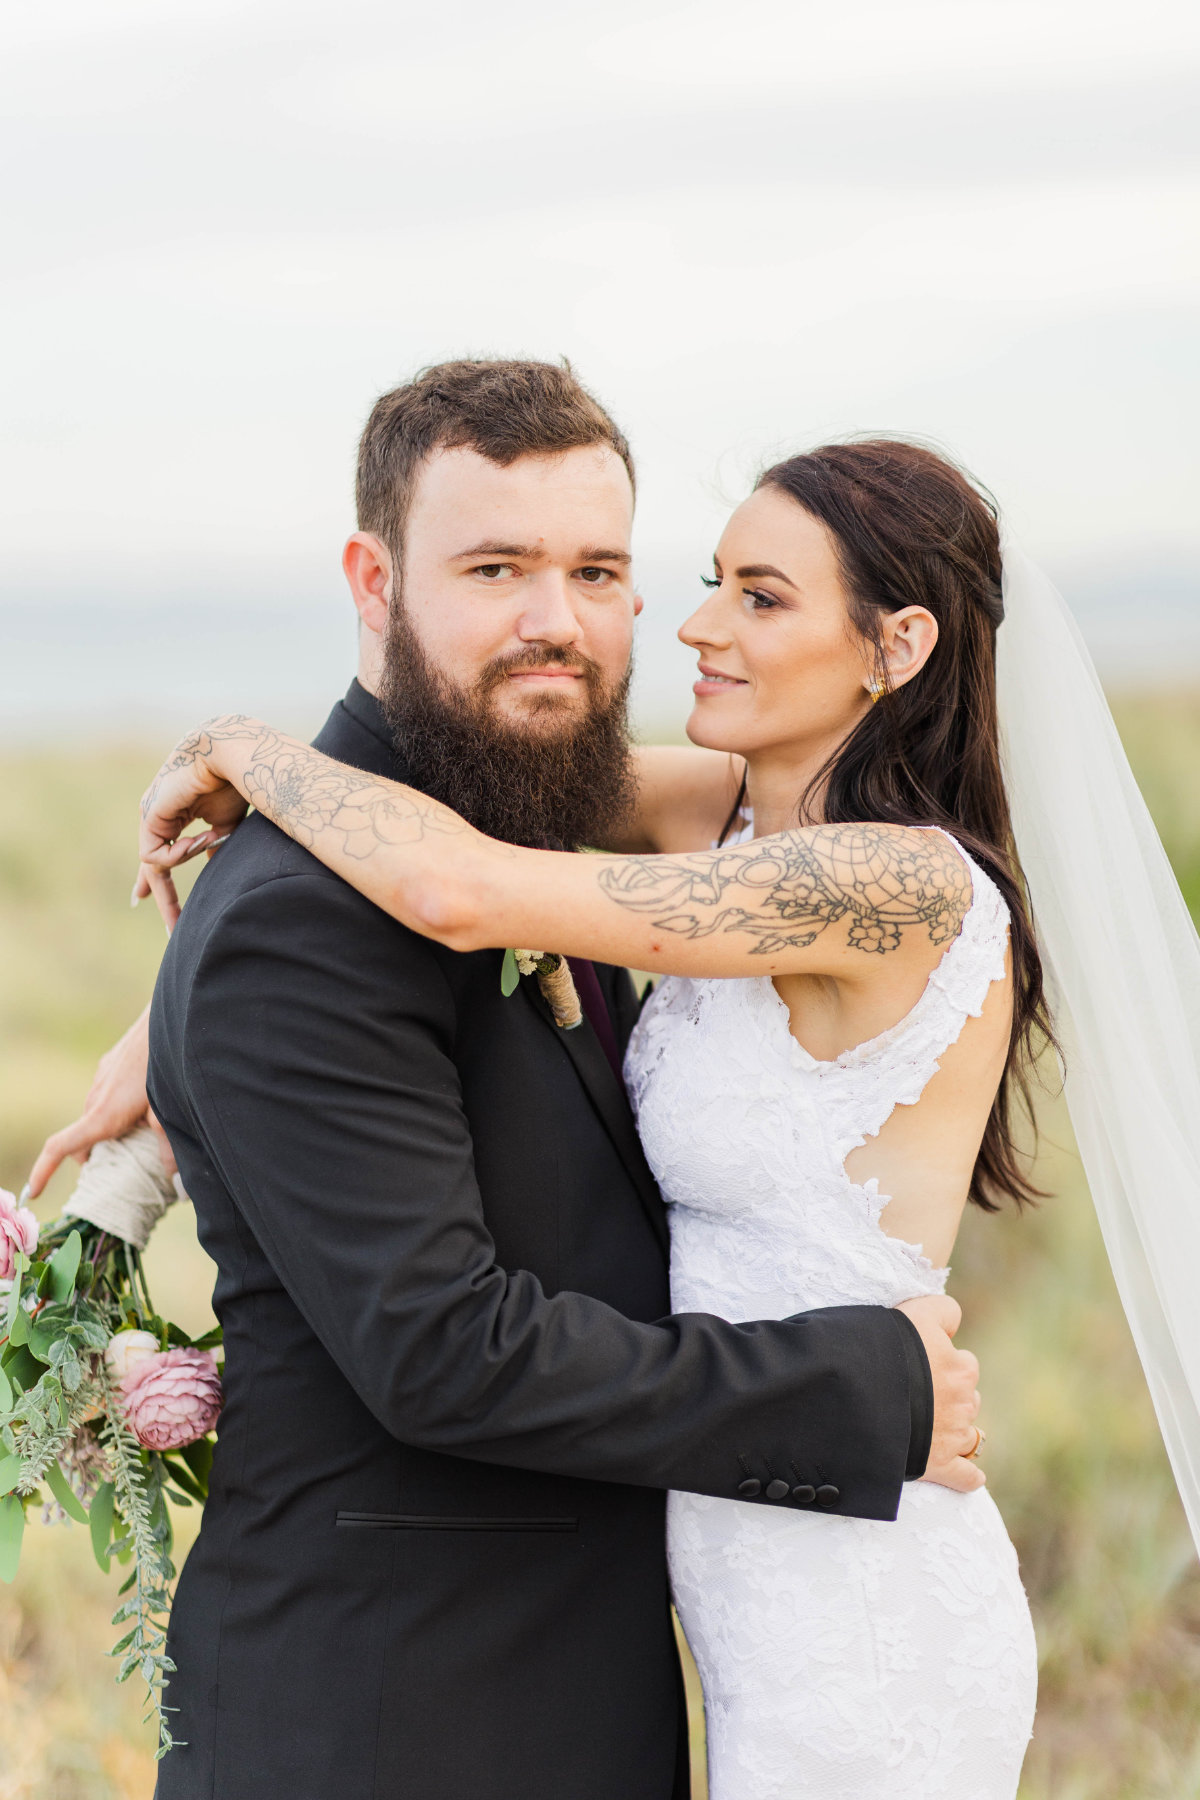 Keirra and Andrew's Breakwater Bar and Restaurant wedding photographed by Alyce Holzy